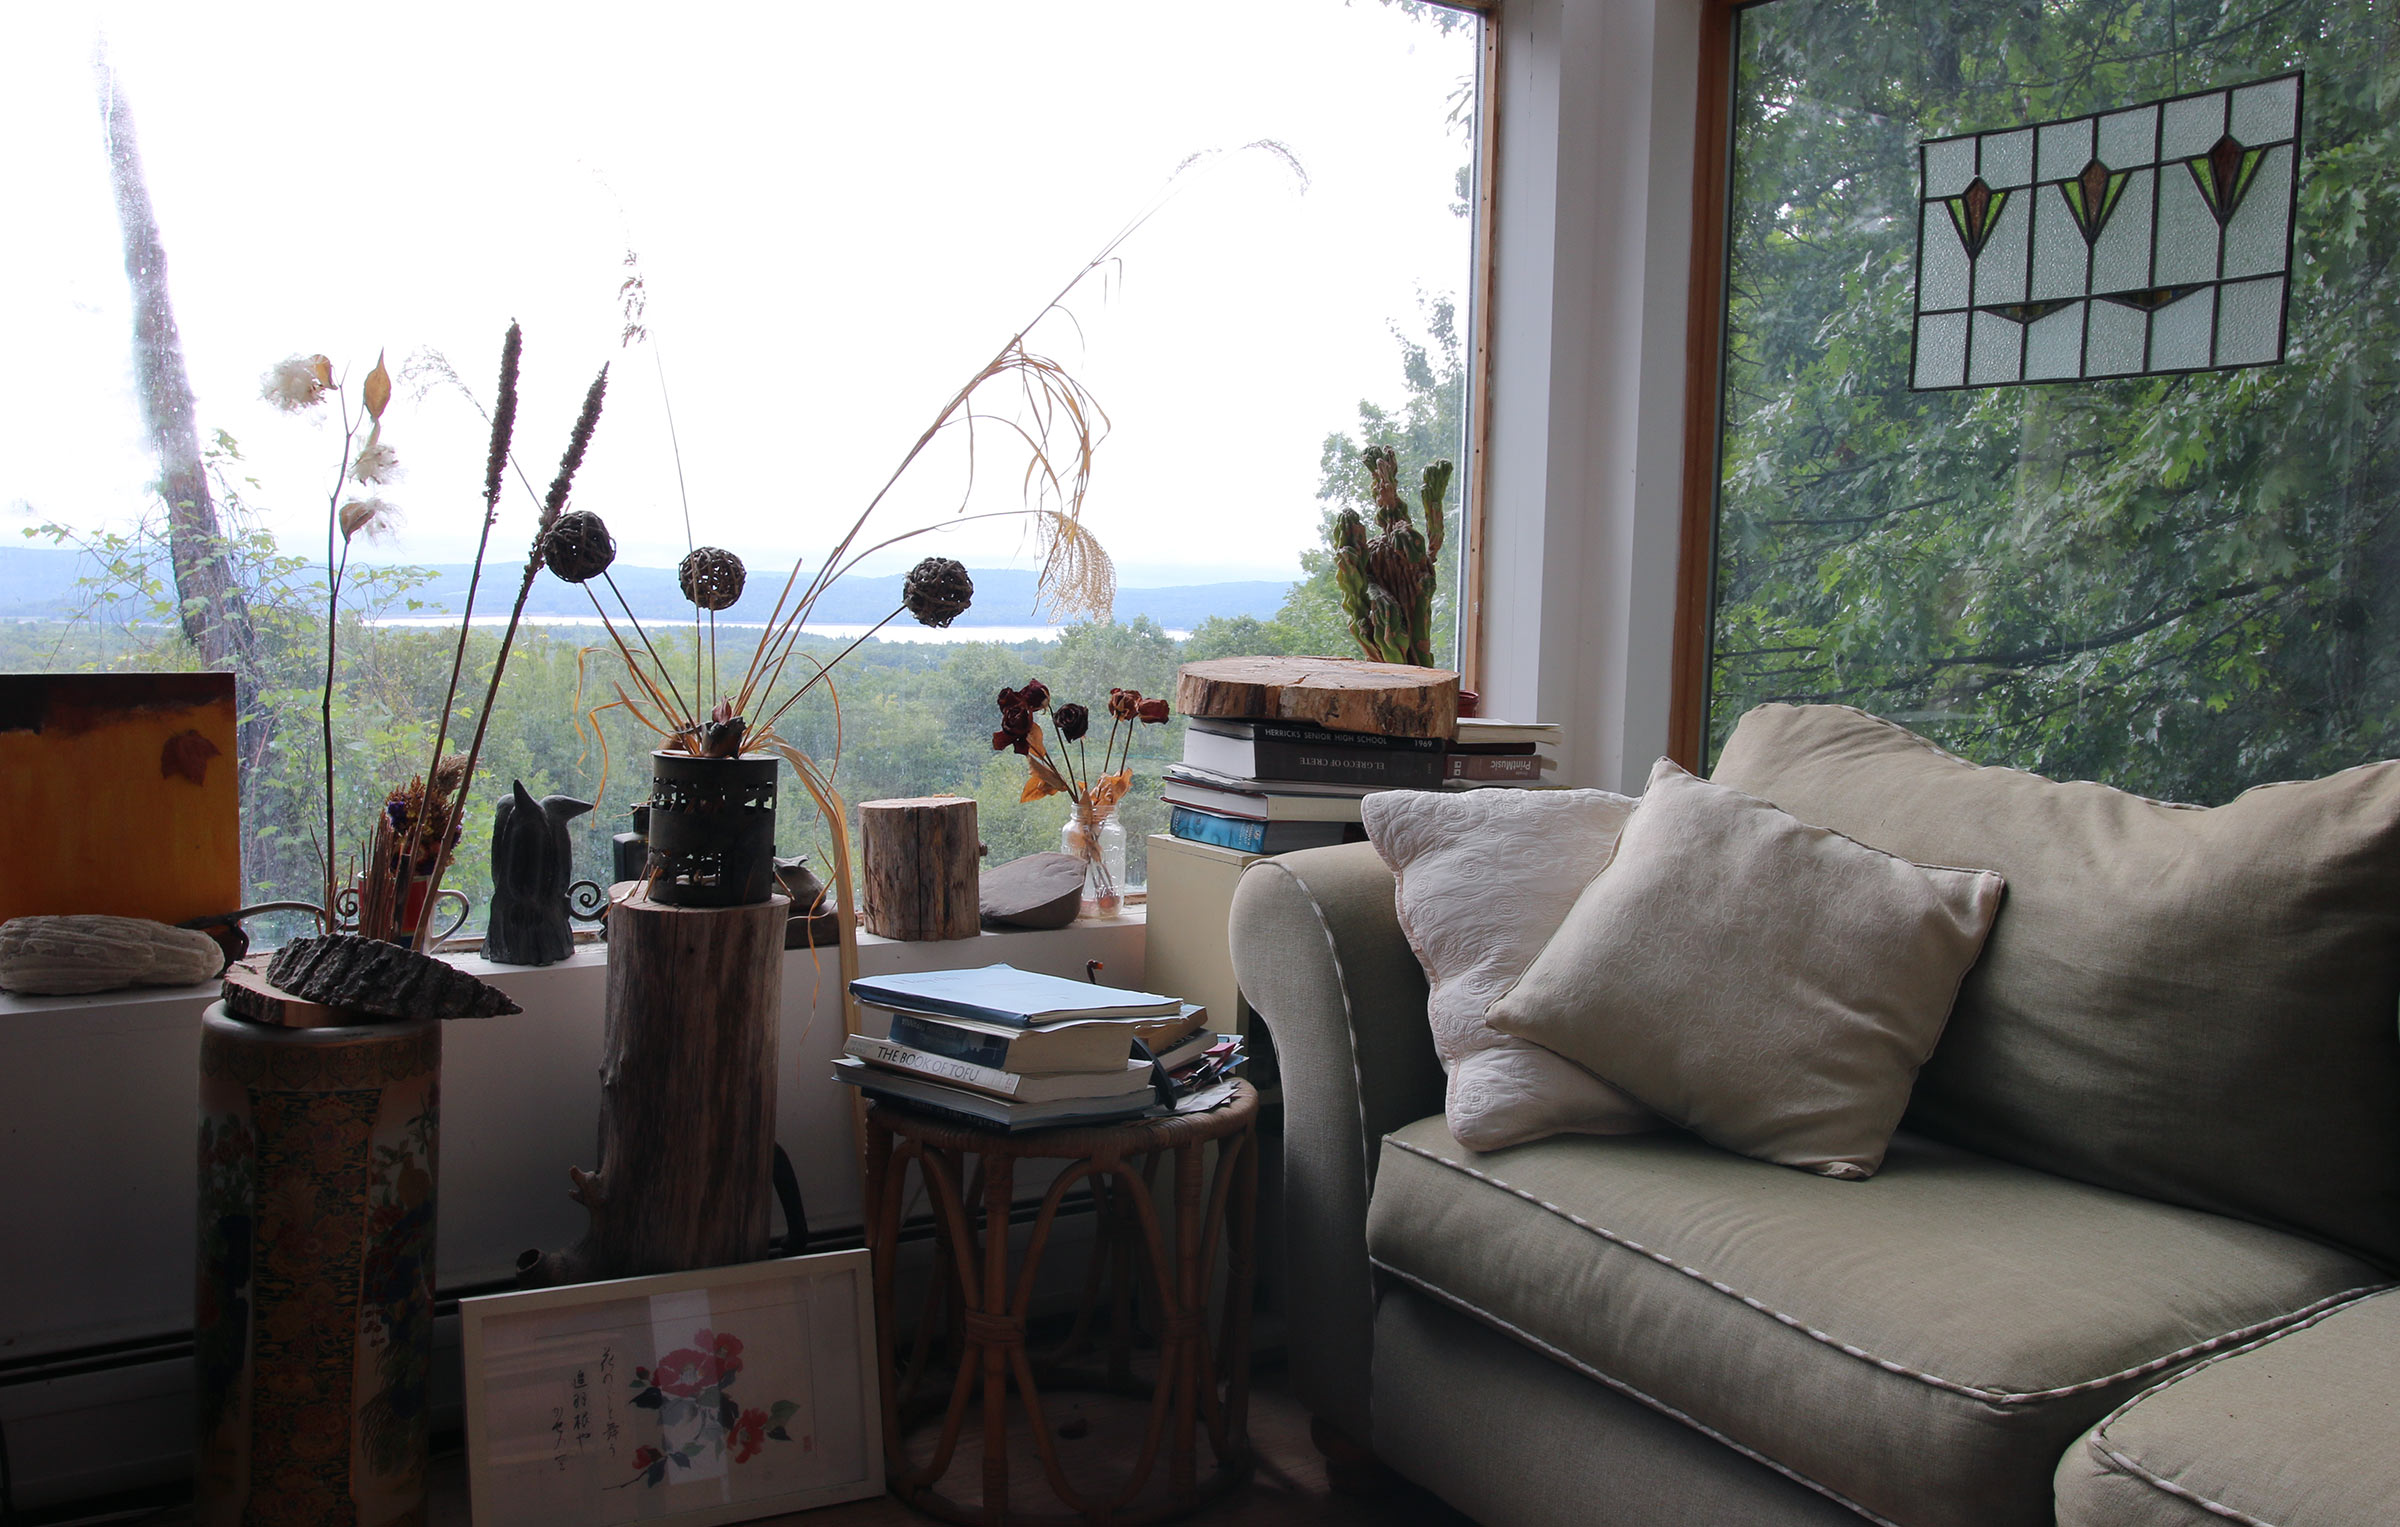 The view from the interior of George Tsontakis's home